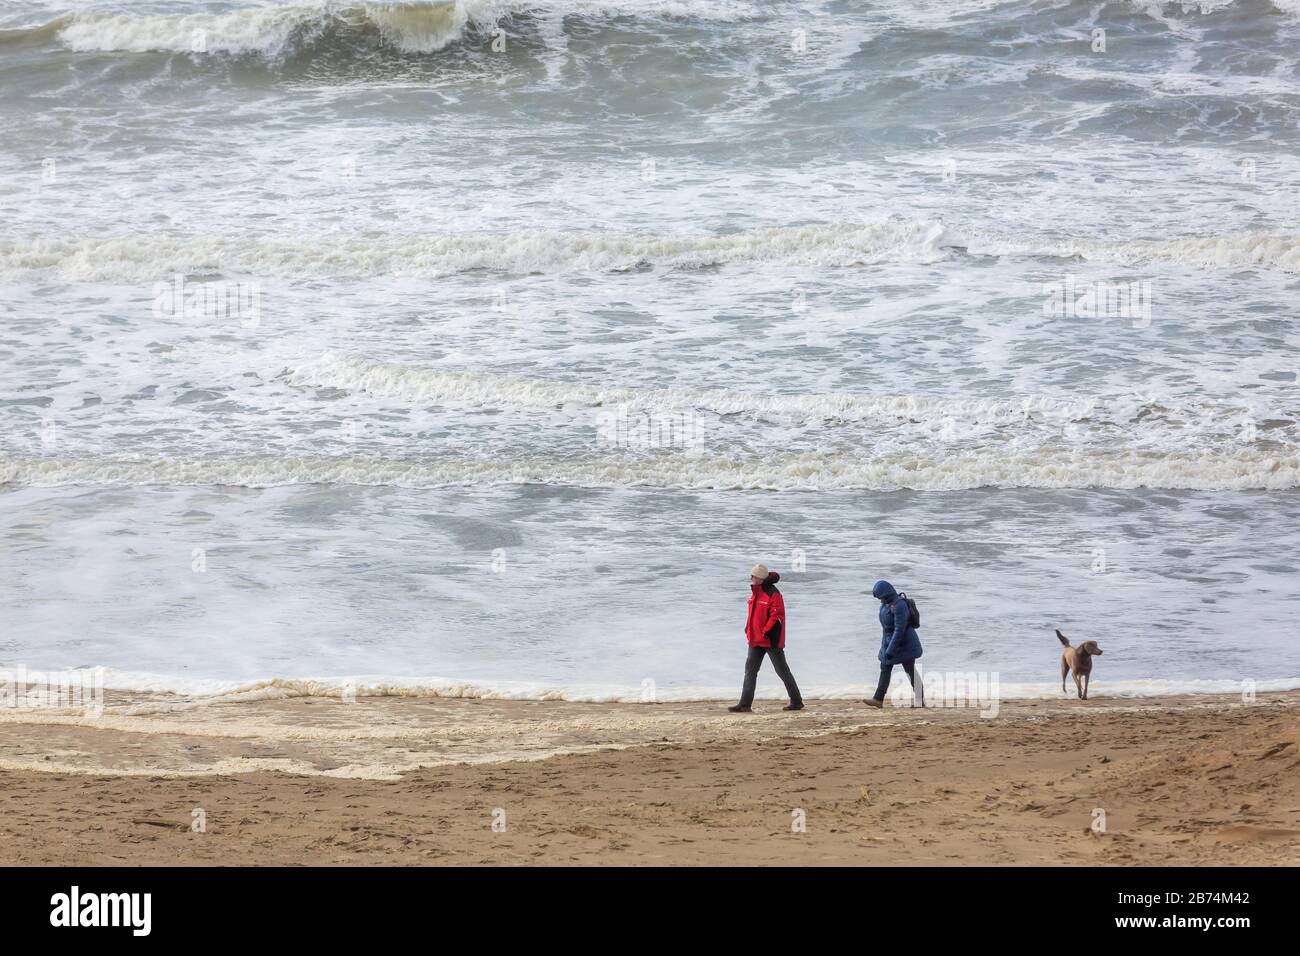 Bloemendaal aan Zee, Netherlands - February 23, 2020: beach at the Northern Sea with unidentified people. Bloemendaal aan Zee is a popular beach desti Stock Photo